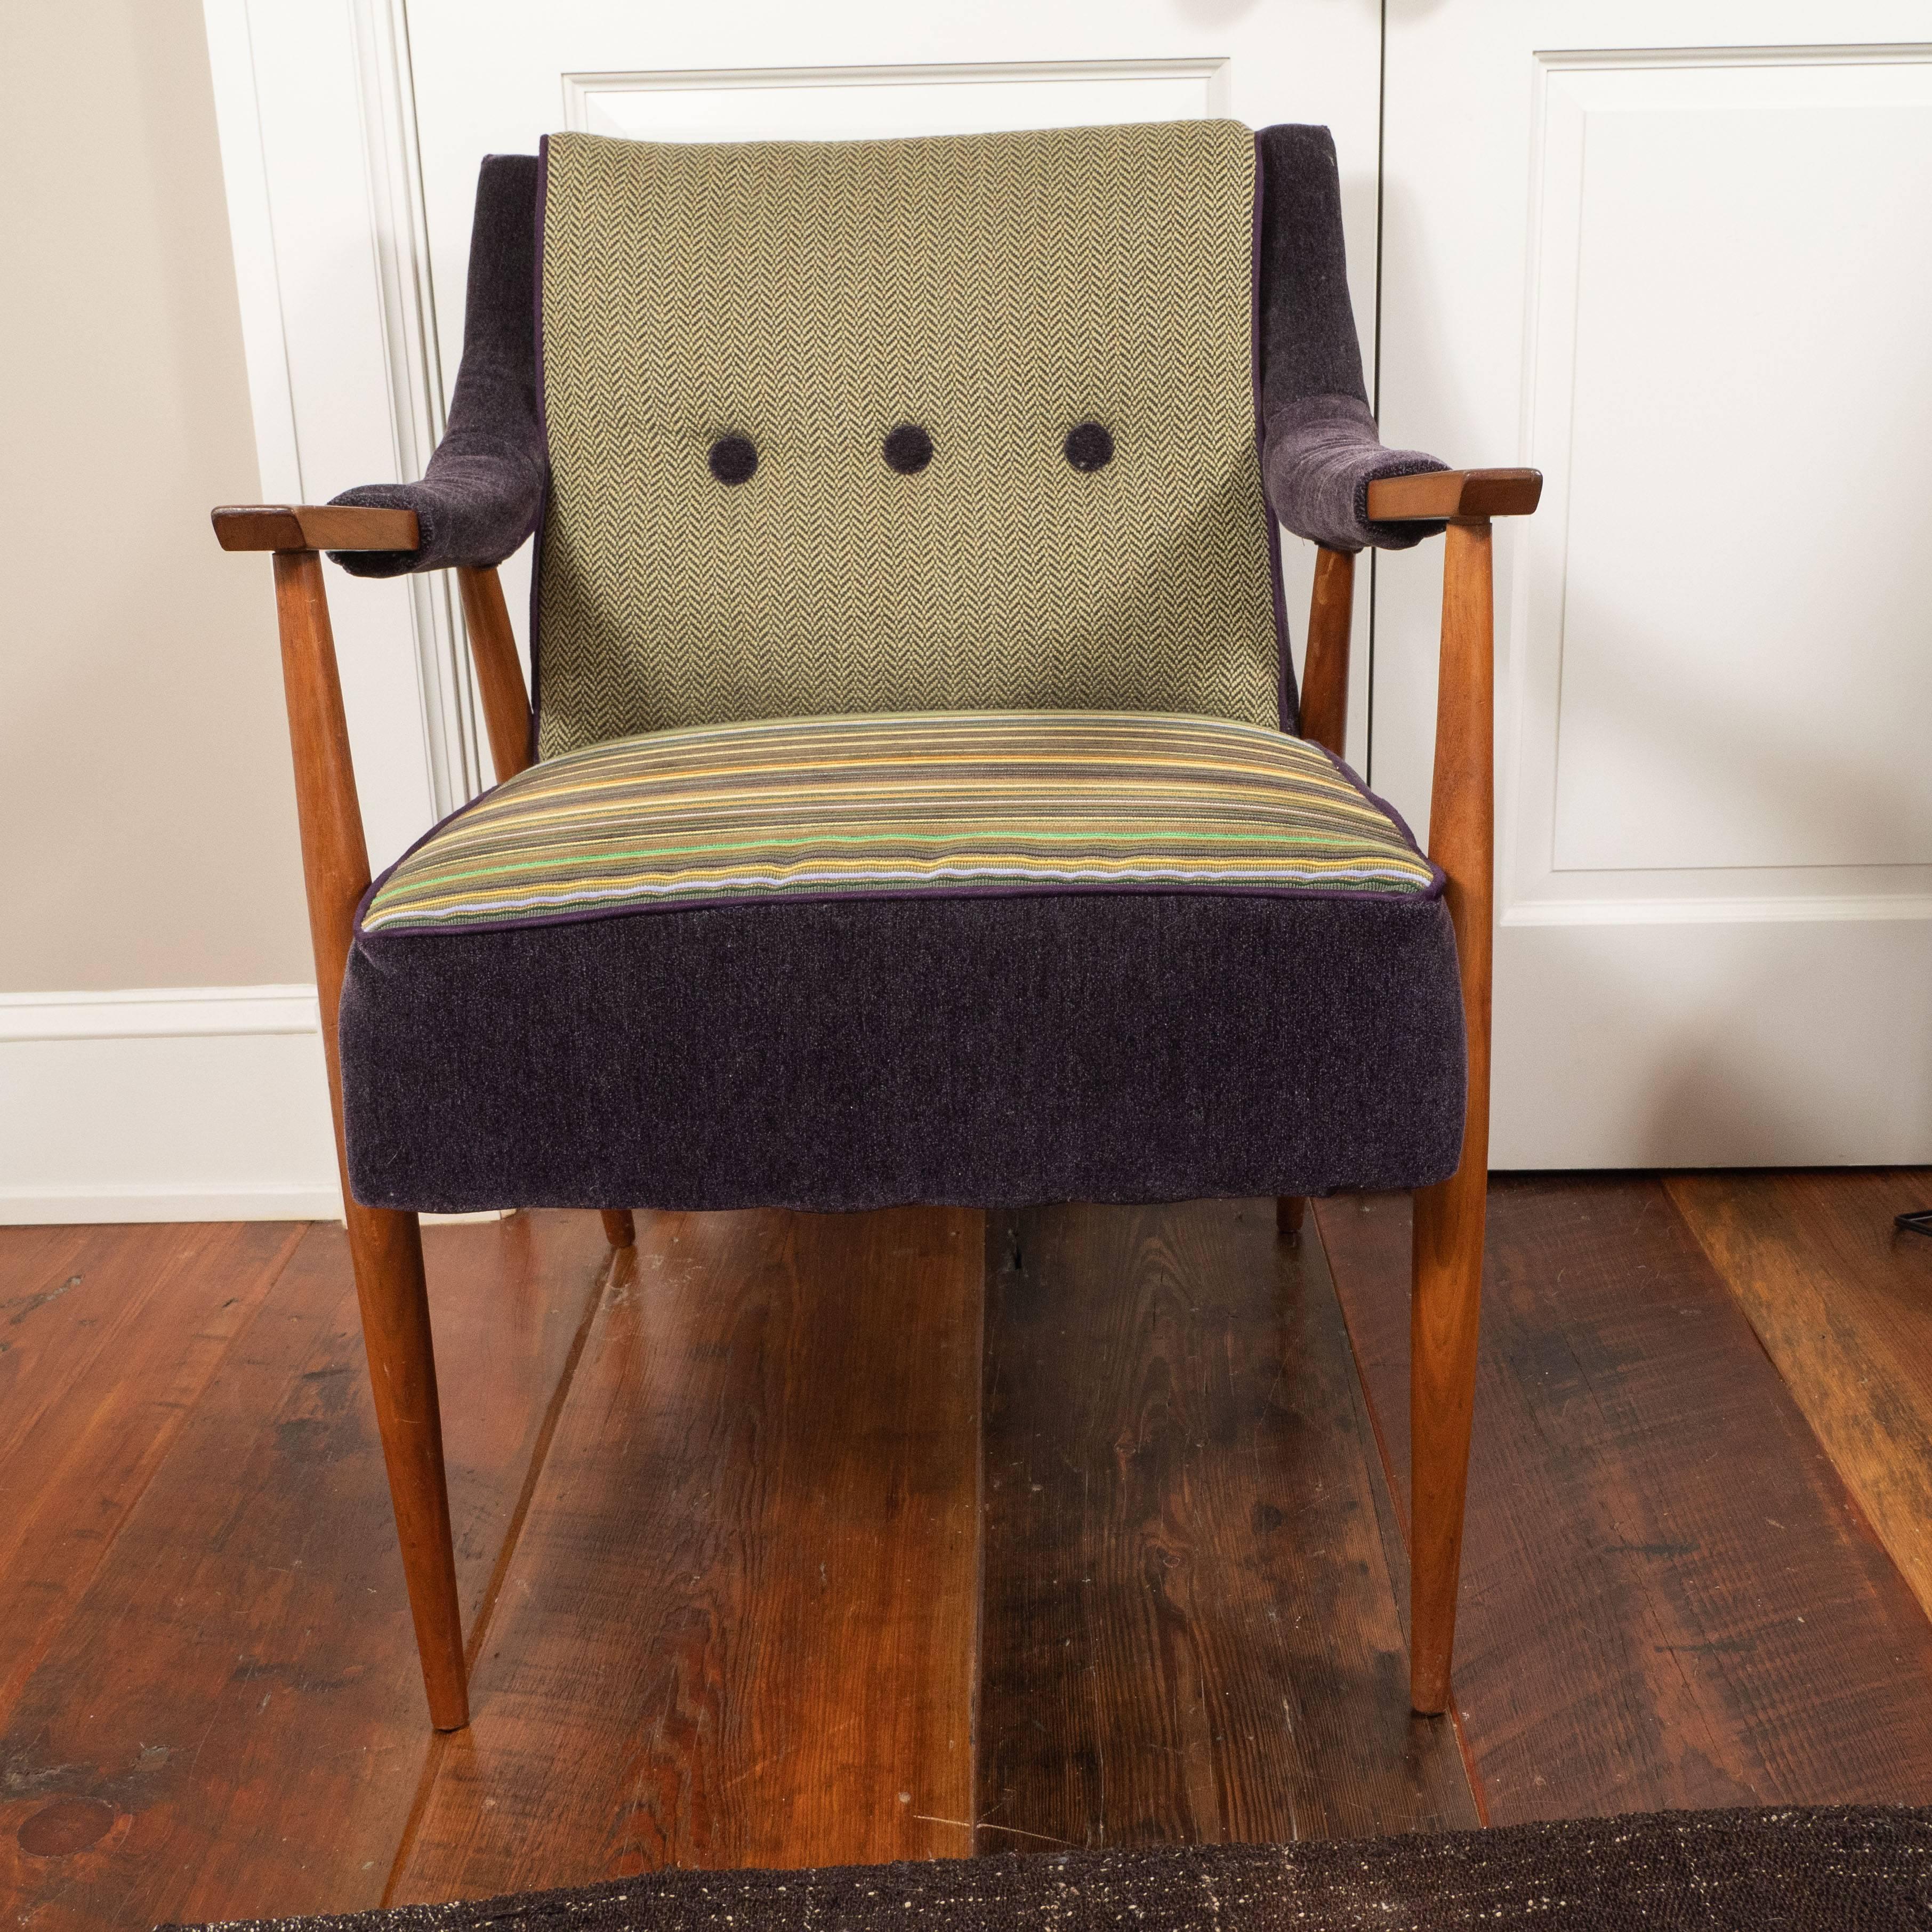 20th Century Midcentury Chair and Footstool with New Upholstery